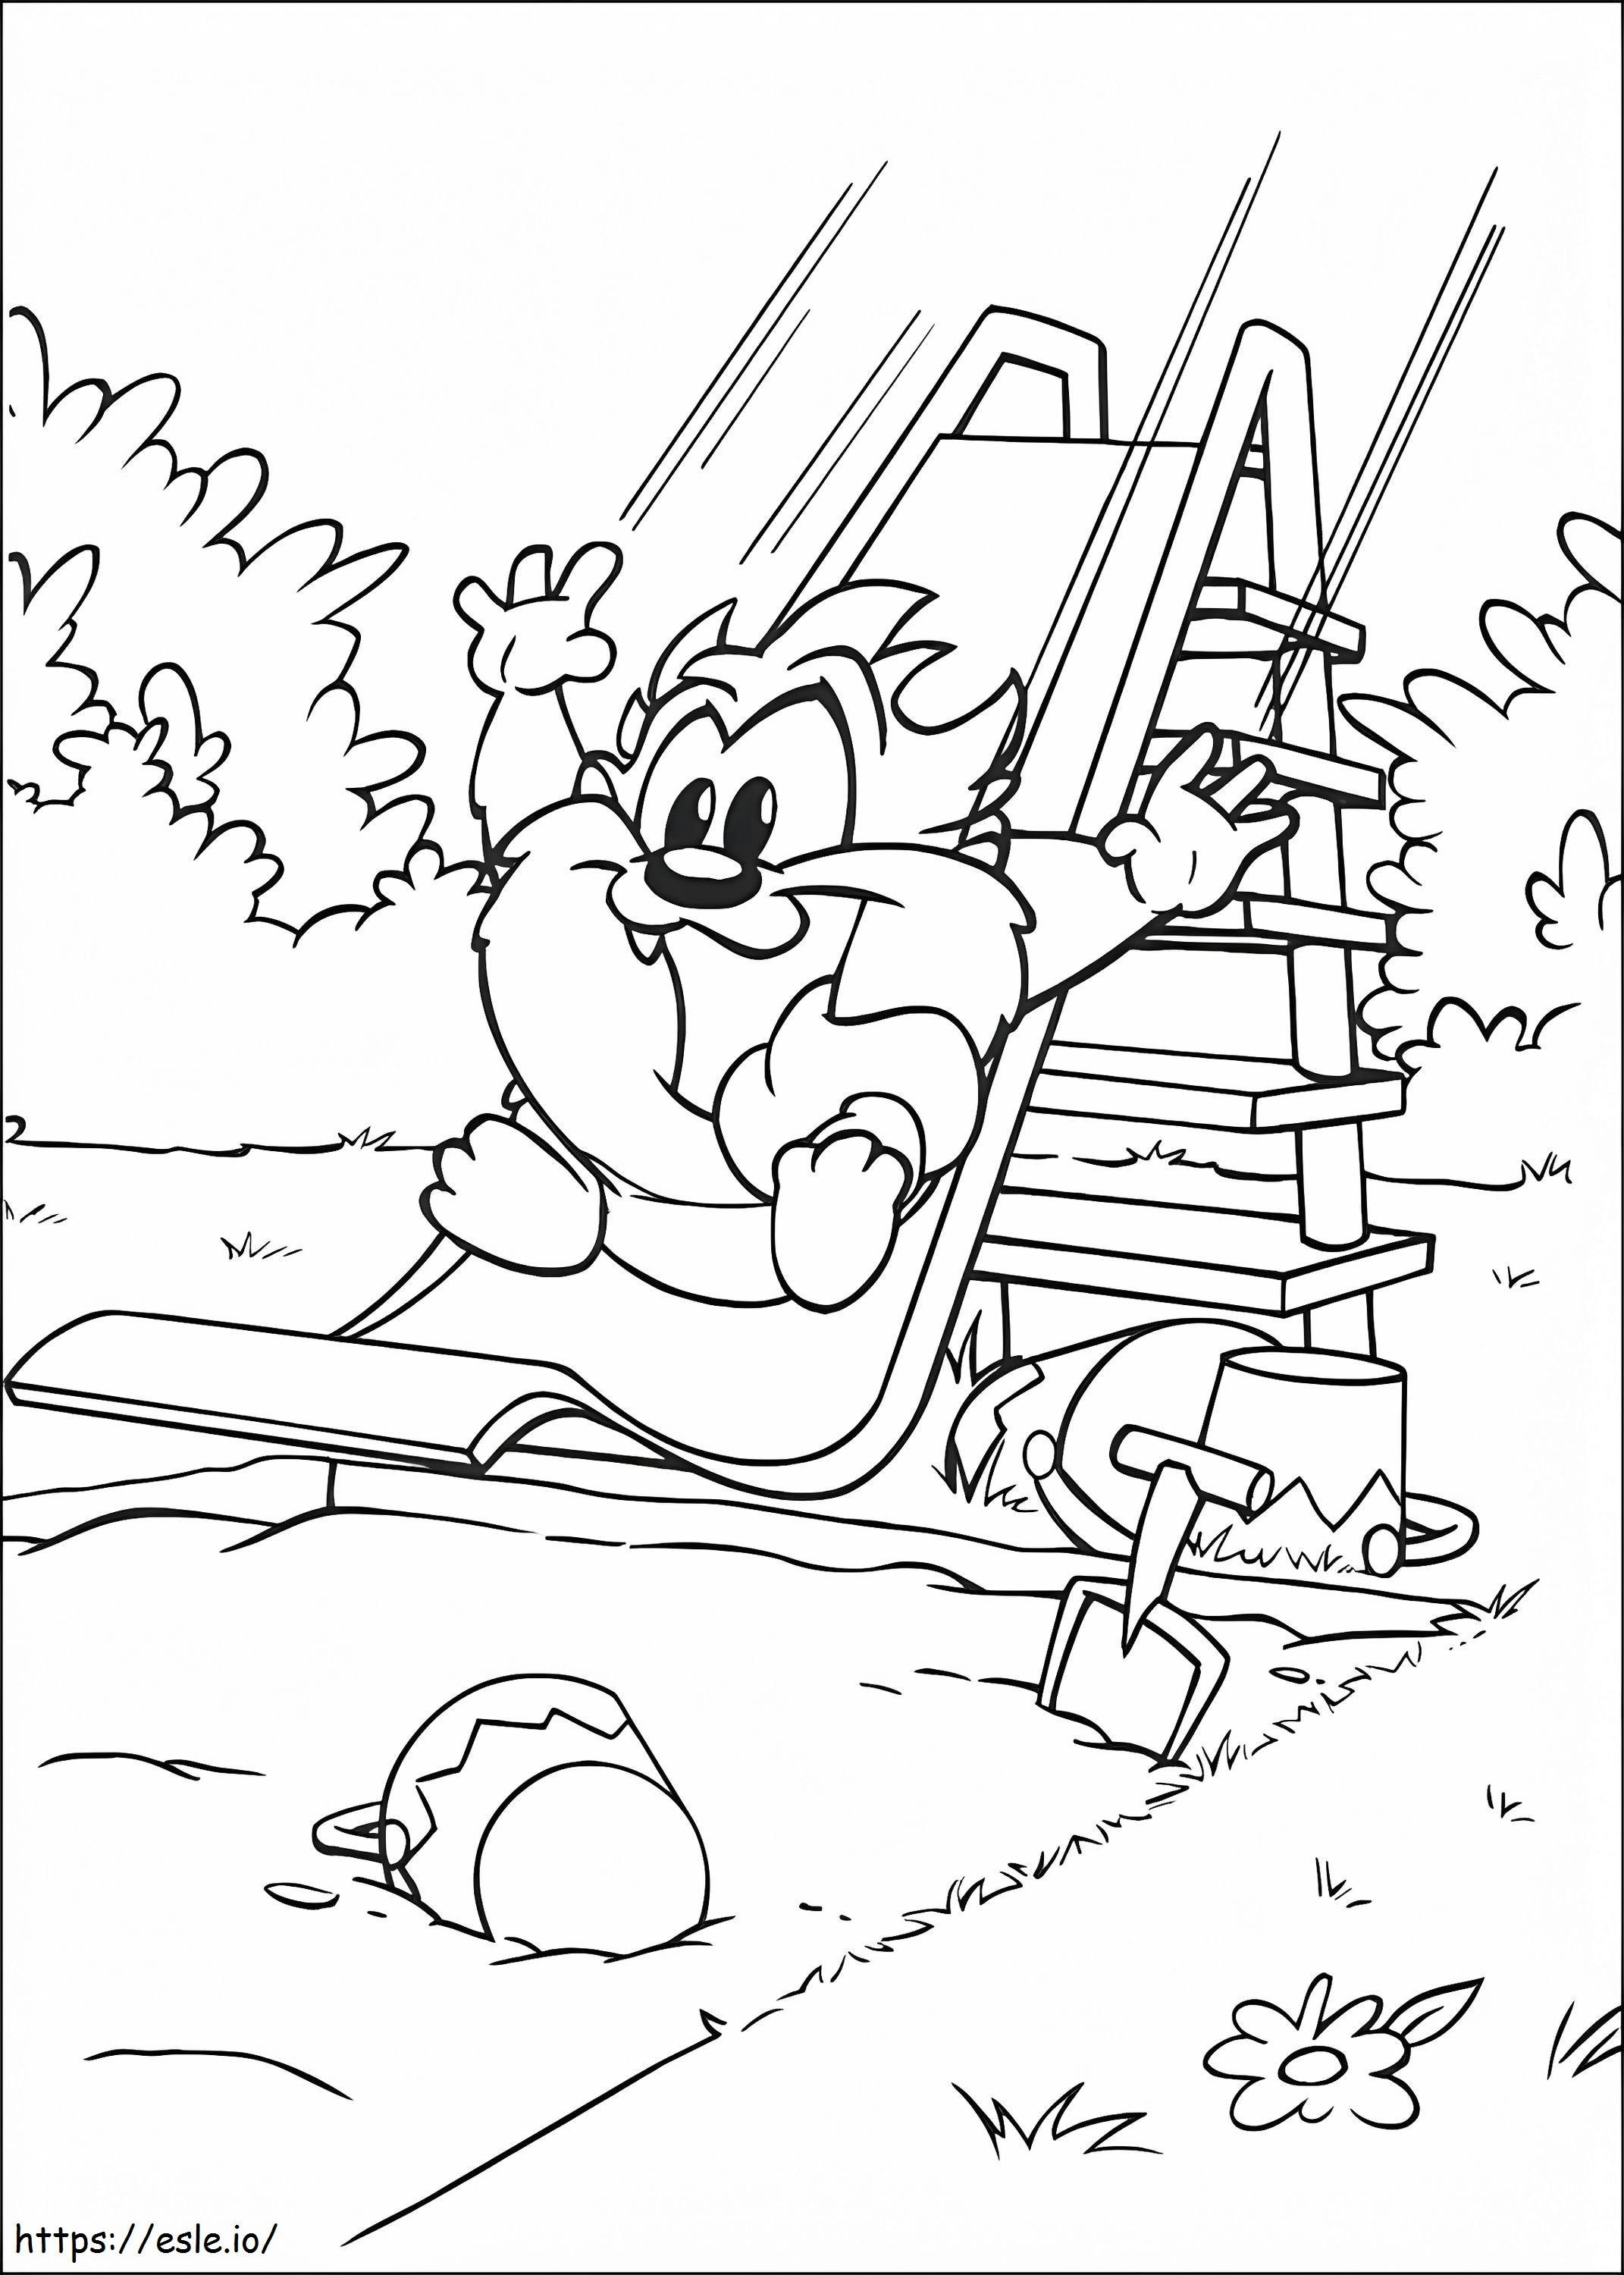 1533694961 Baby Taz Sliding A4 coloring page